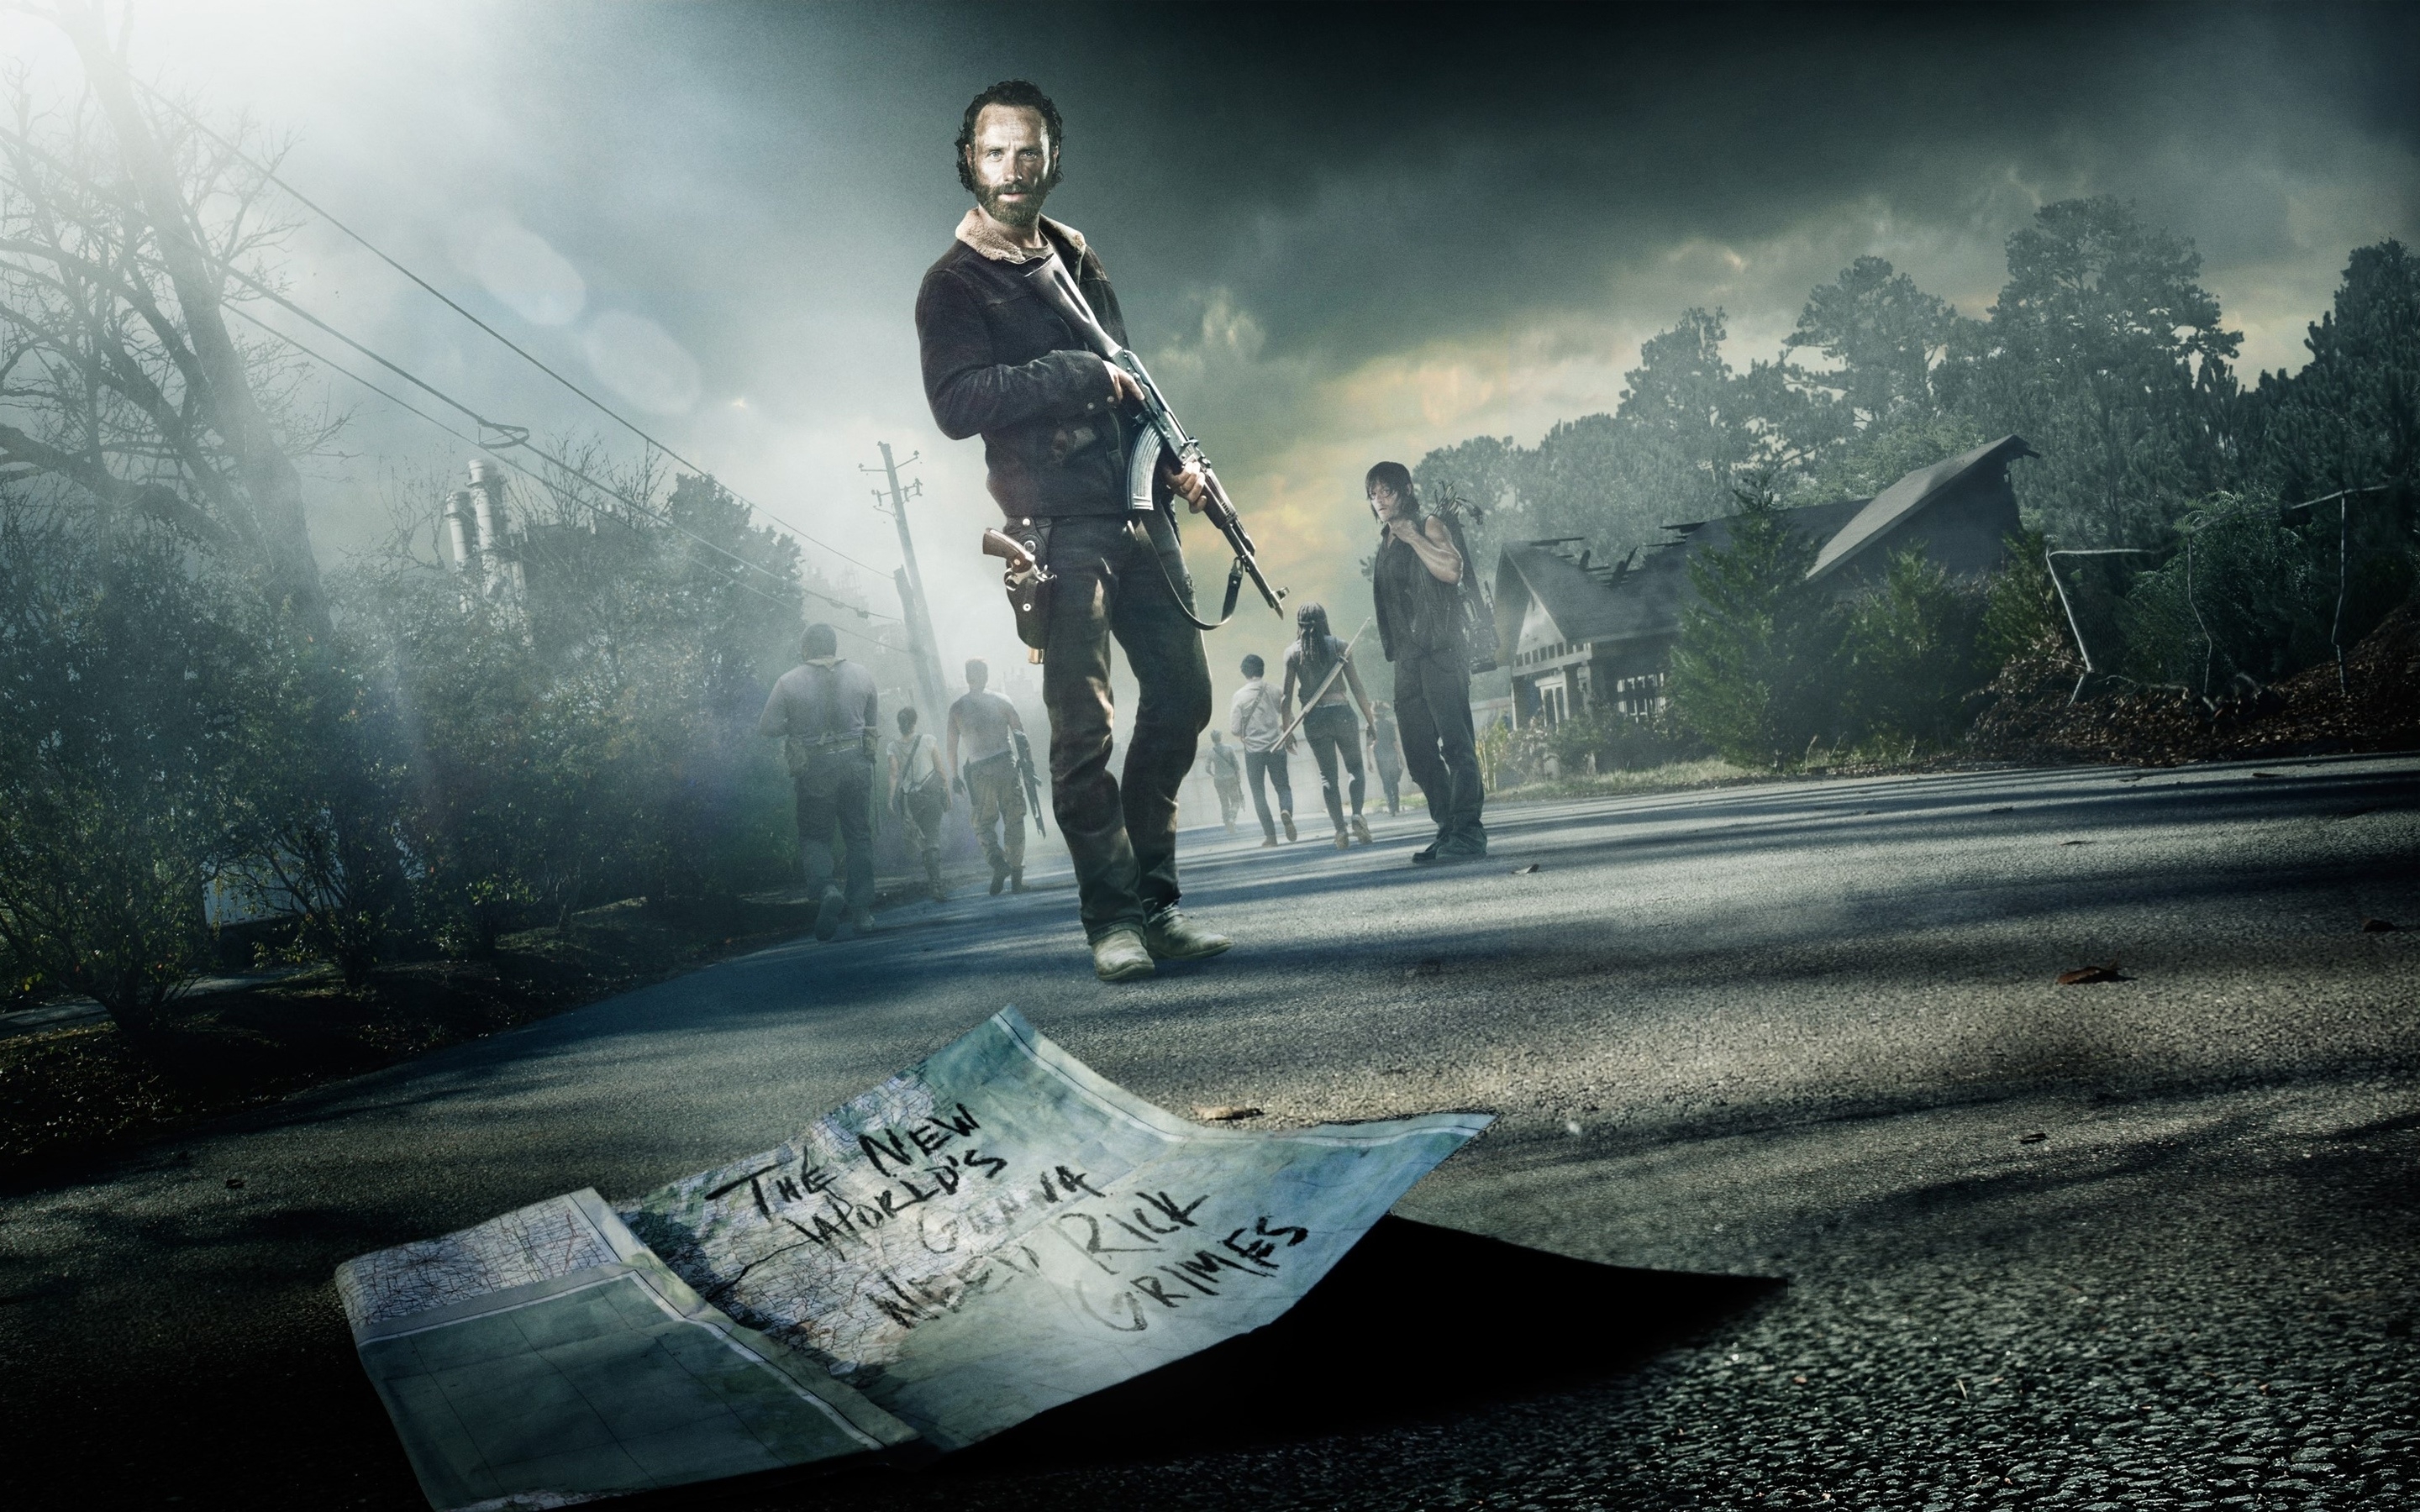 10 Most Popular The Walking Dead Wallpaper Hd FULL HD 1920×1080 For PC Background